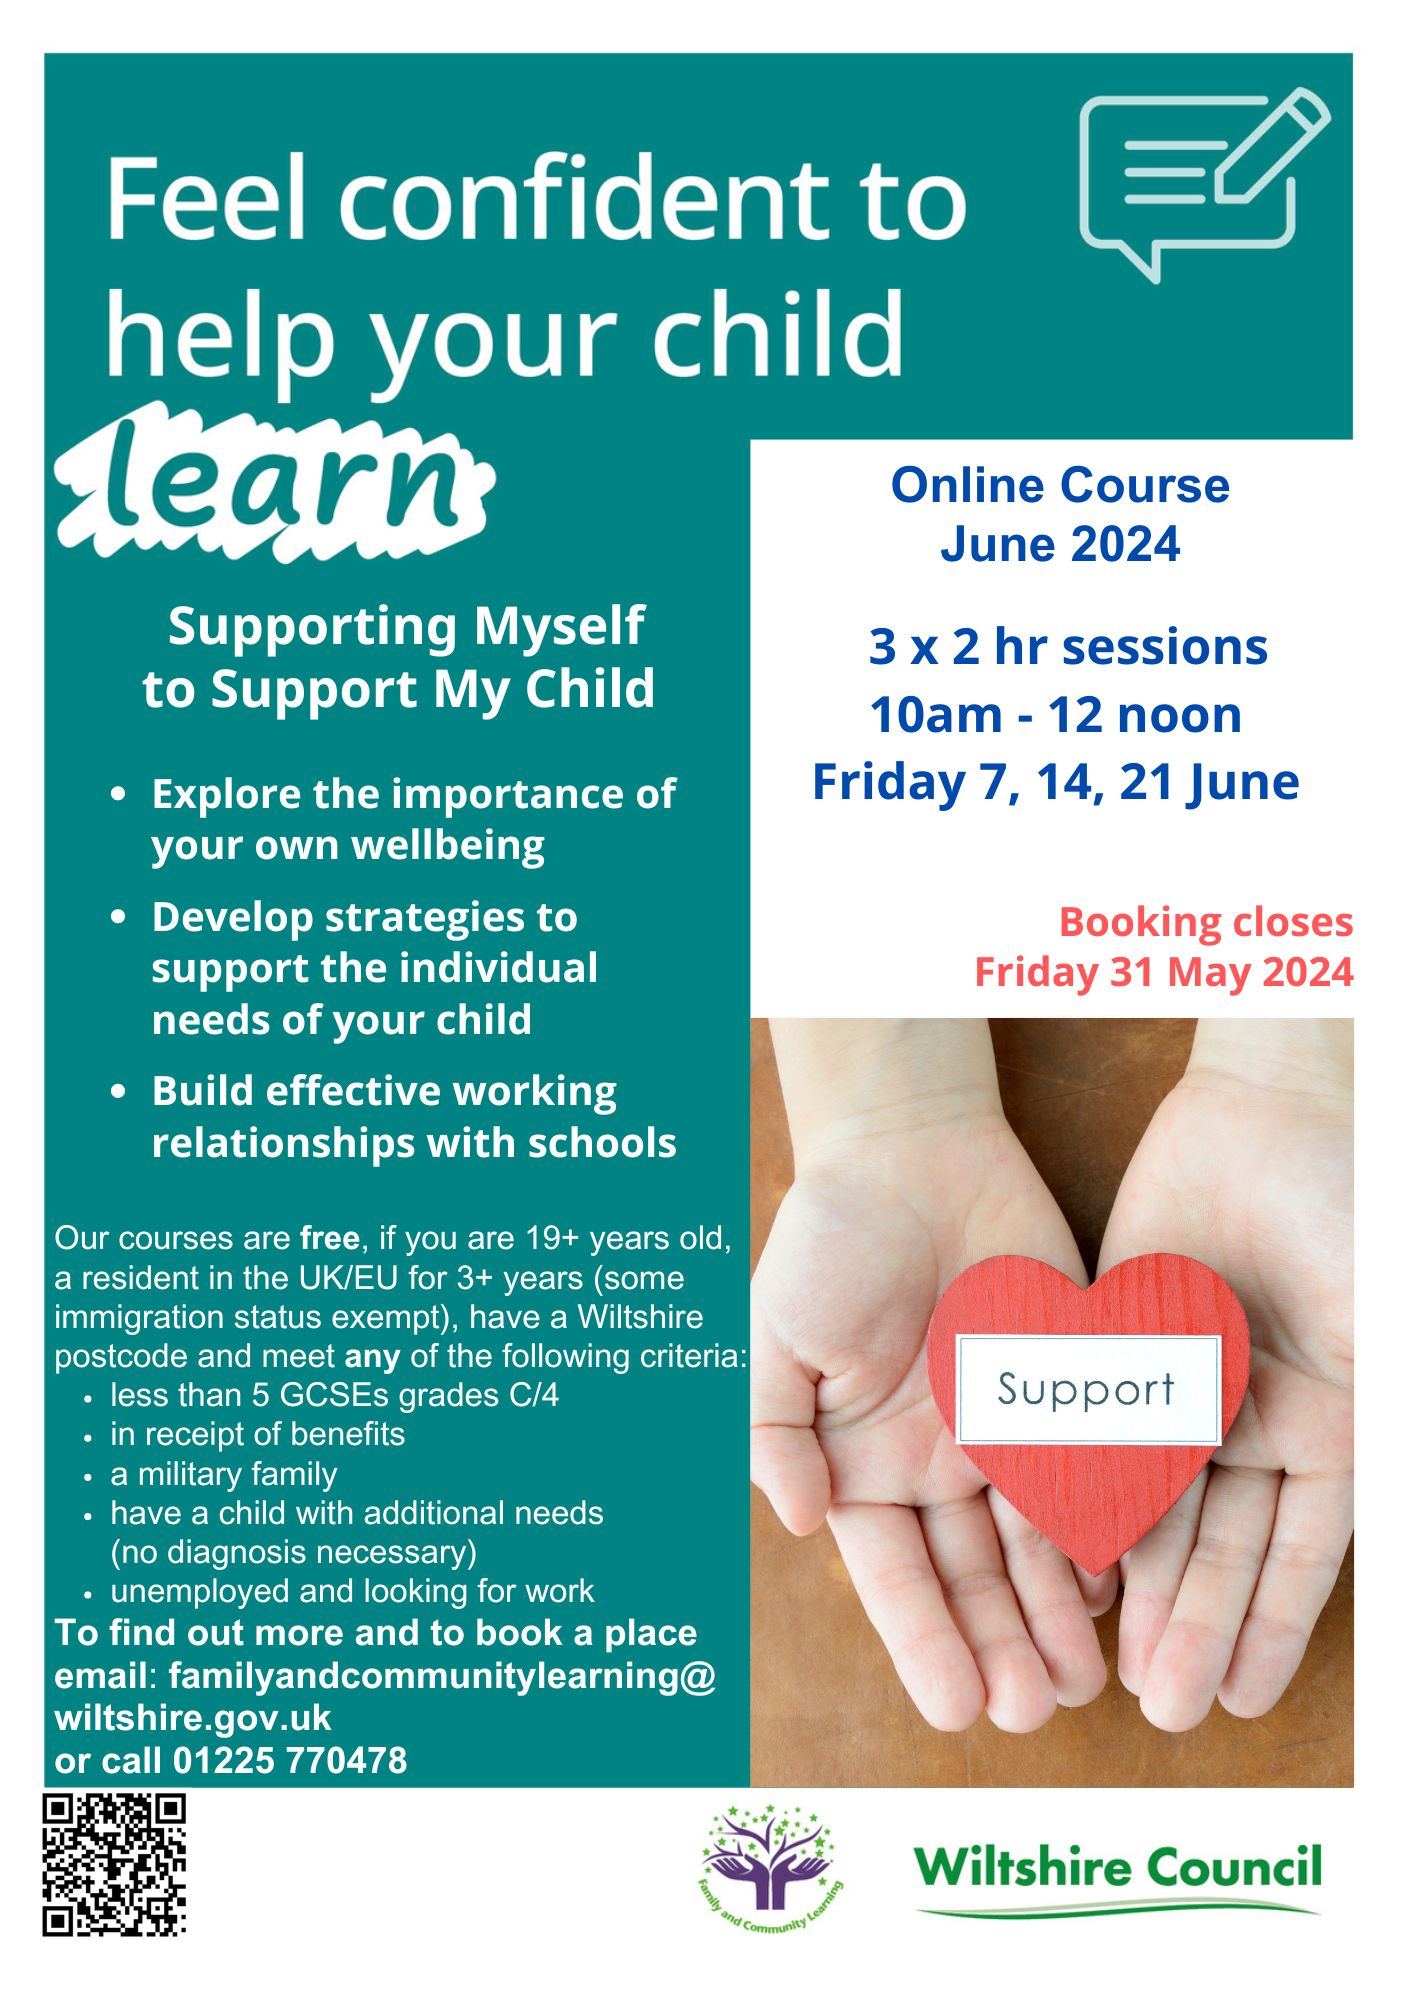 Feel confident to help your child learn - Support myself to Support my Child 